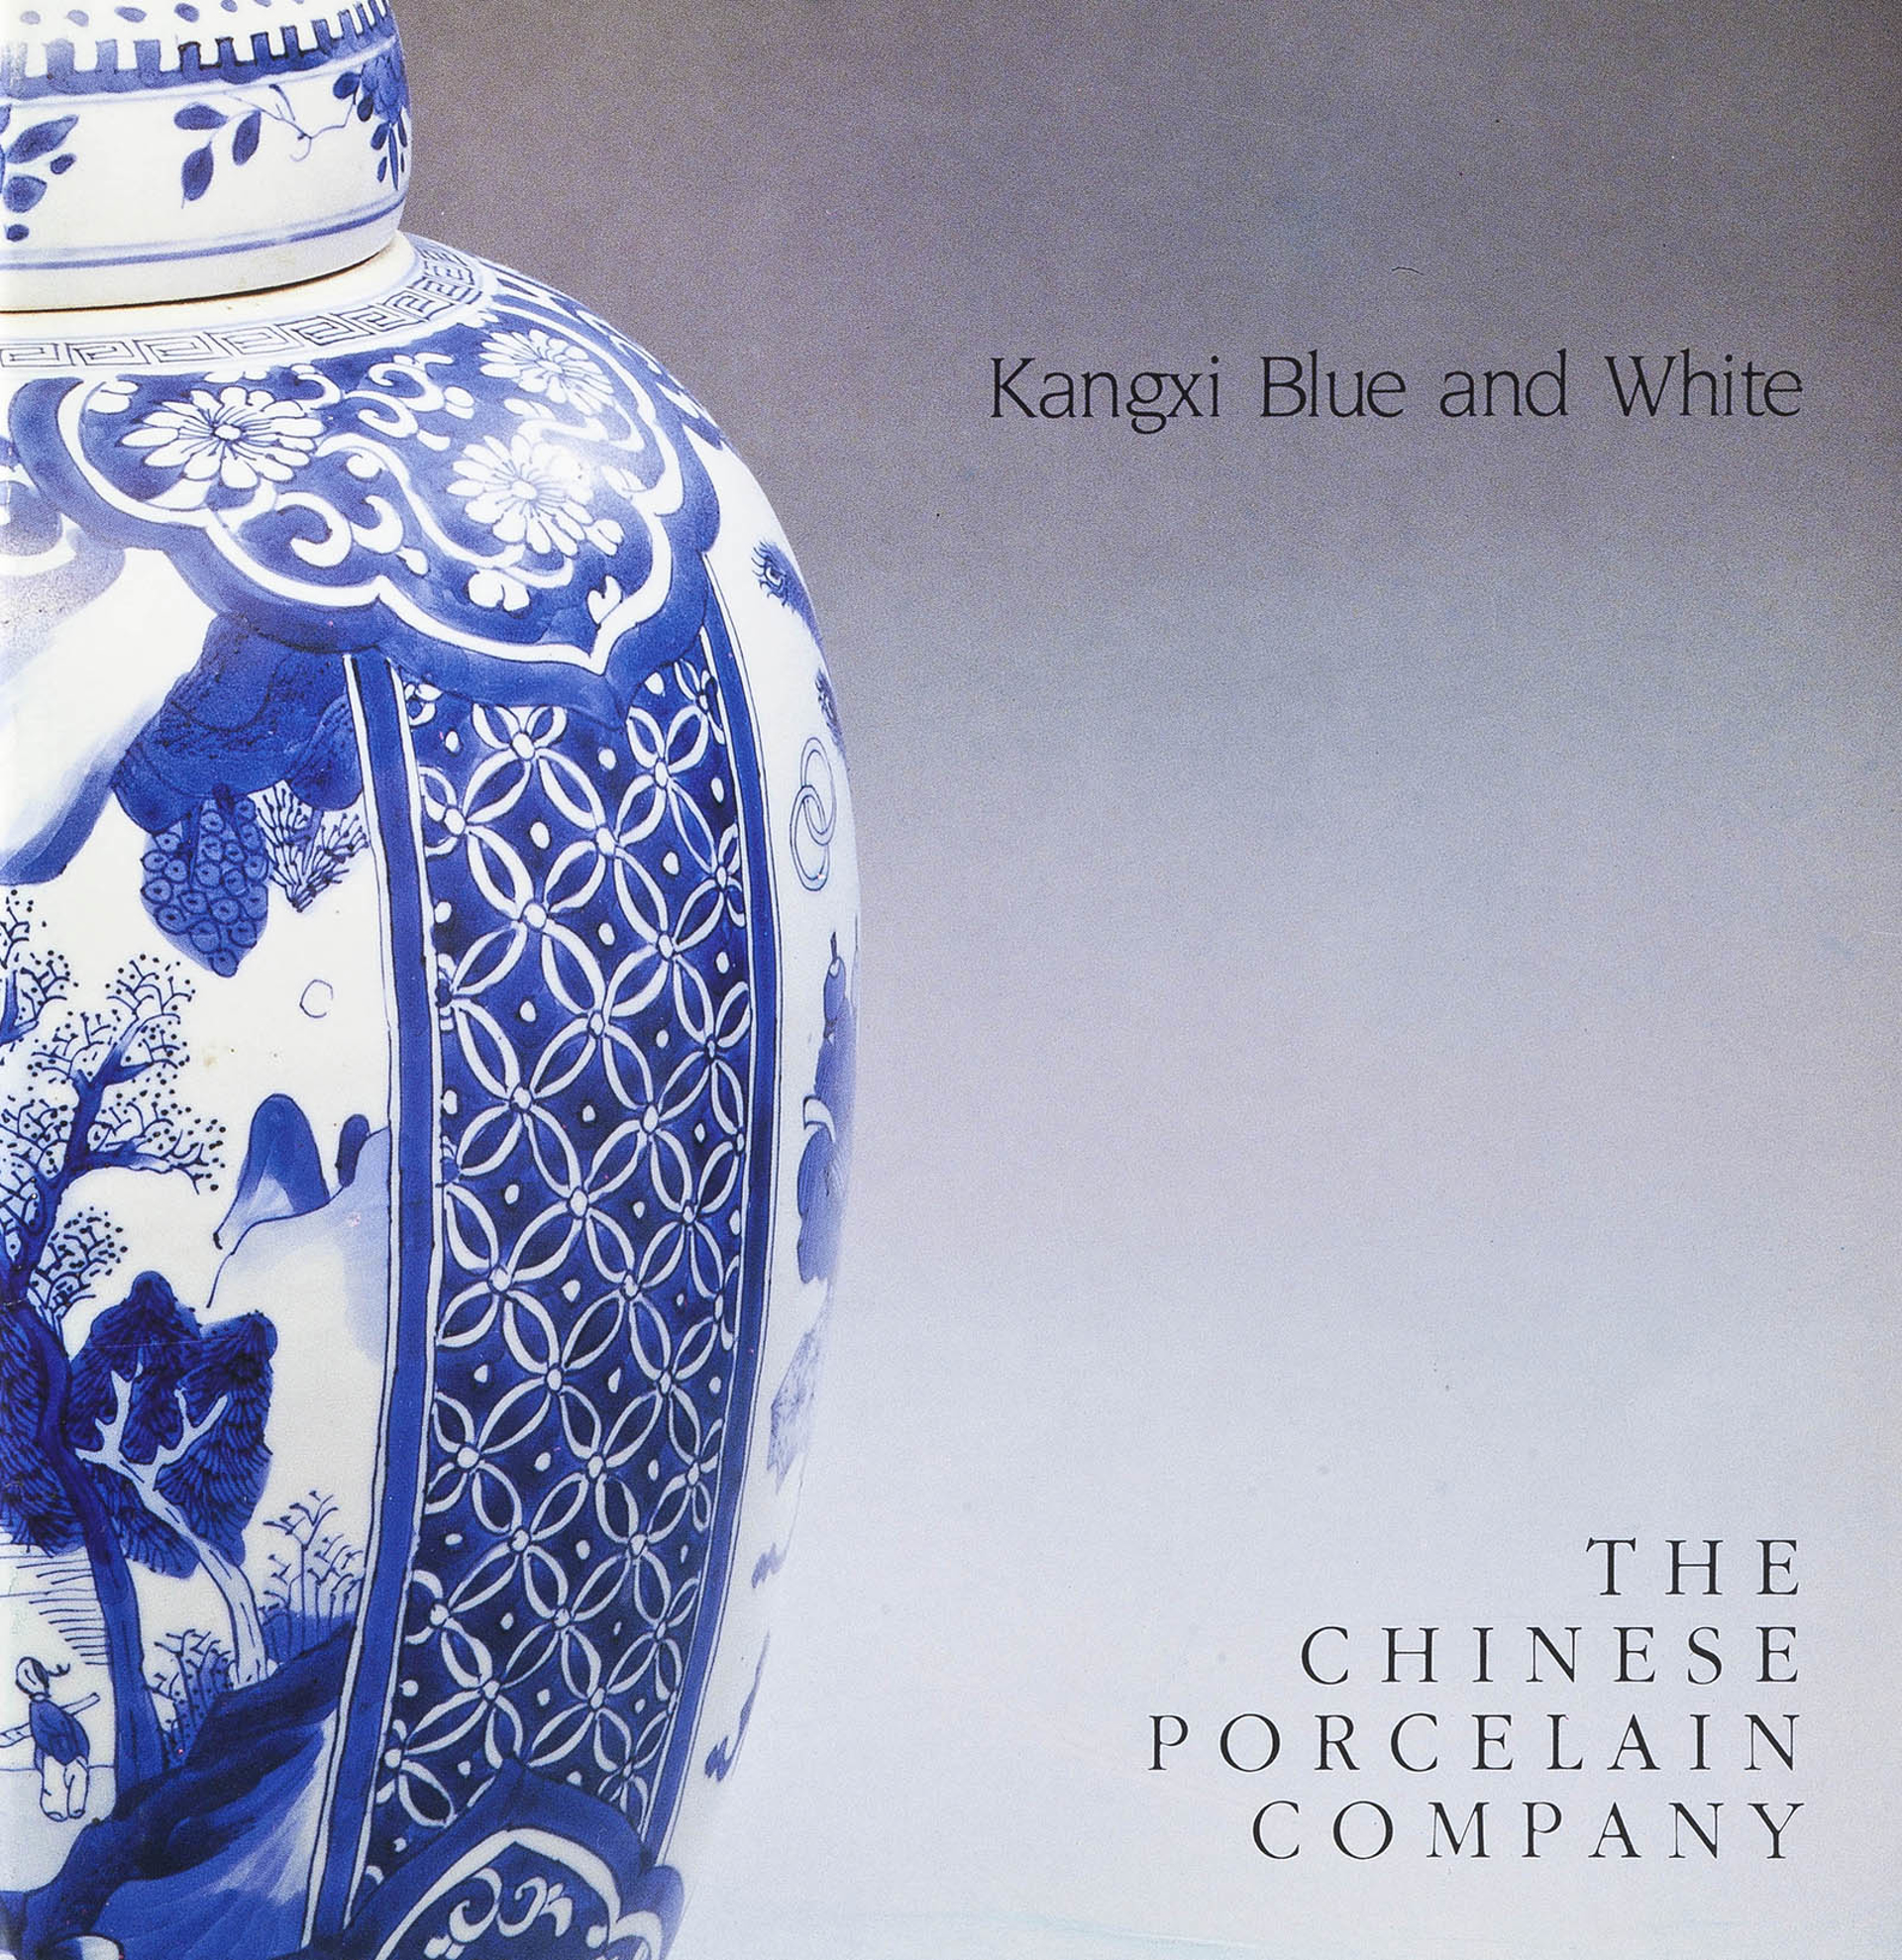 Kangxi Blue and White (out of print) by Catalog 04